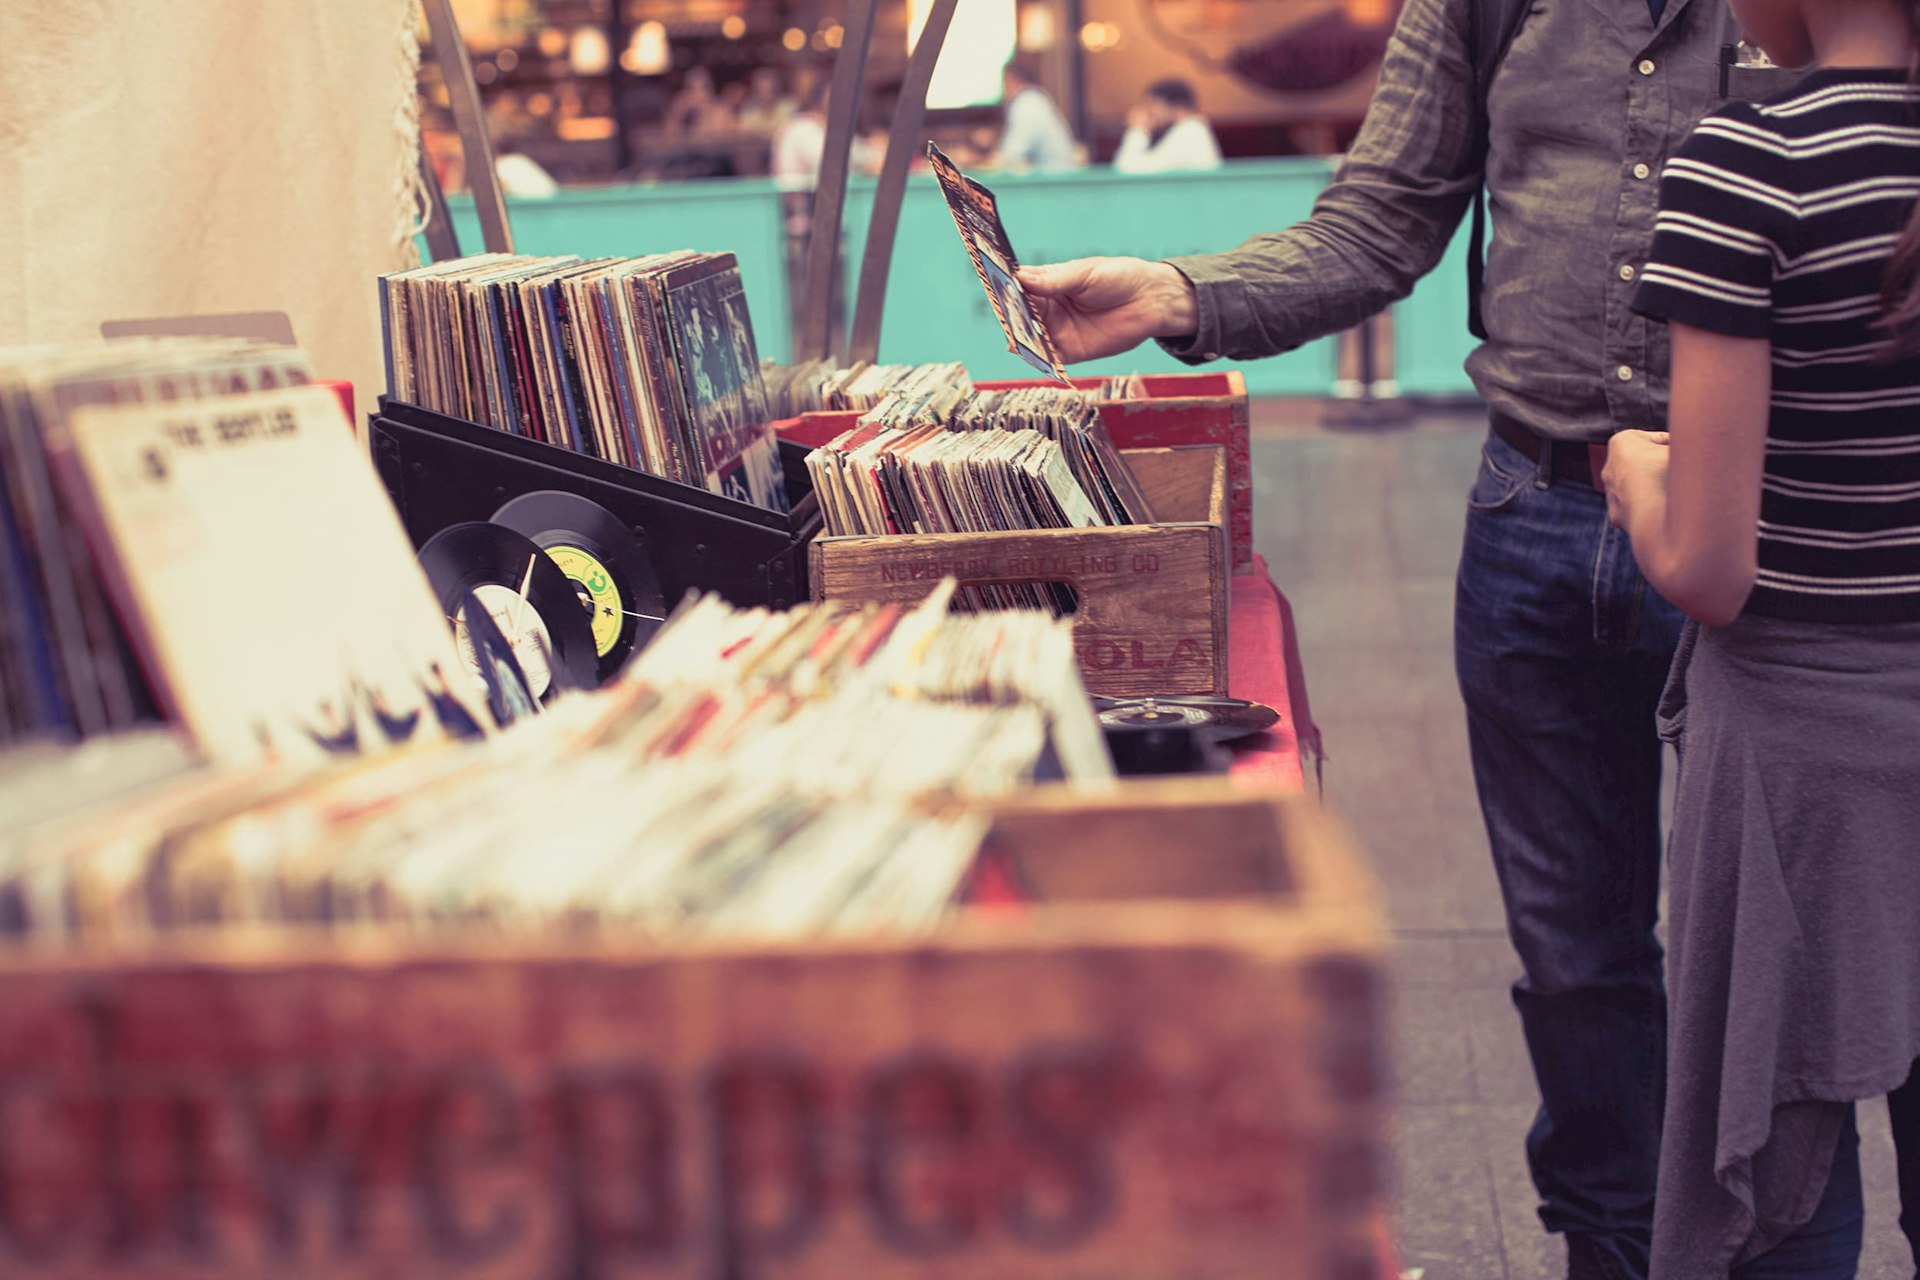 A man picks up a vinyl record from a box on a table.